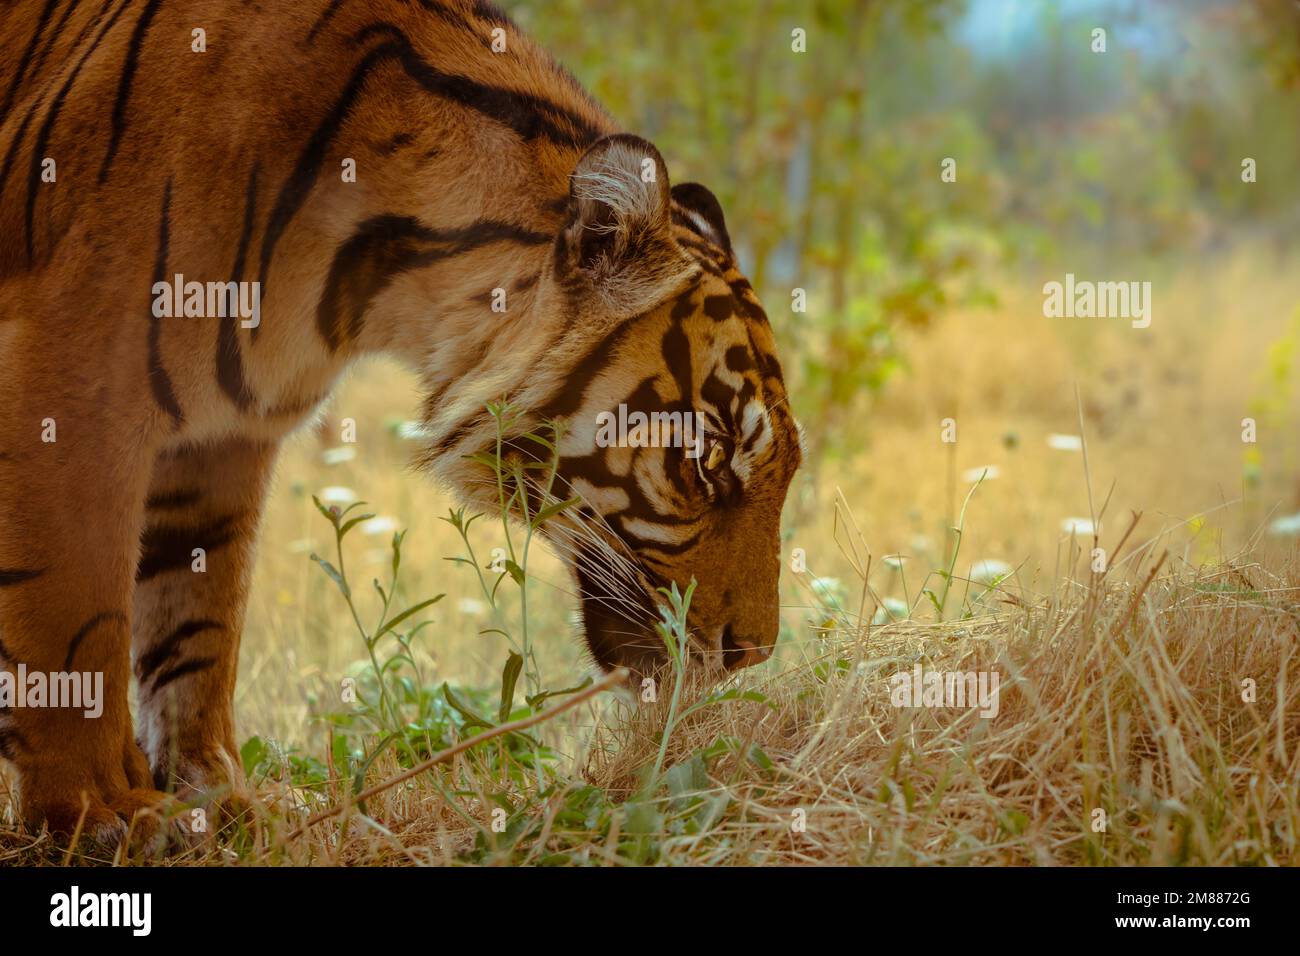 A sumatran tiger standing with face down on the ground Stock Photo